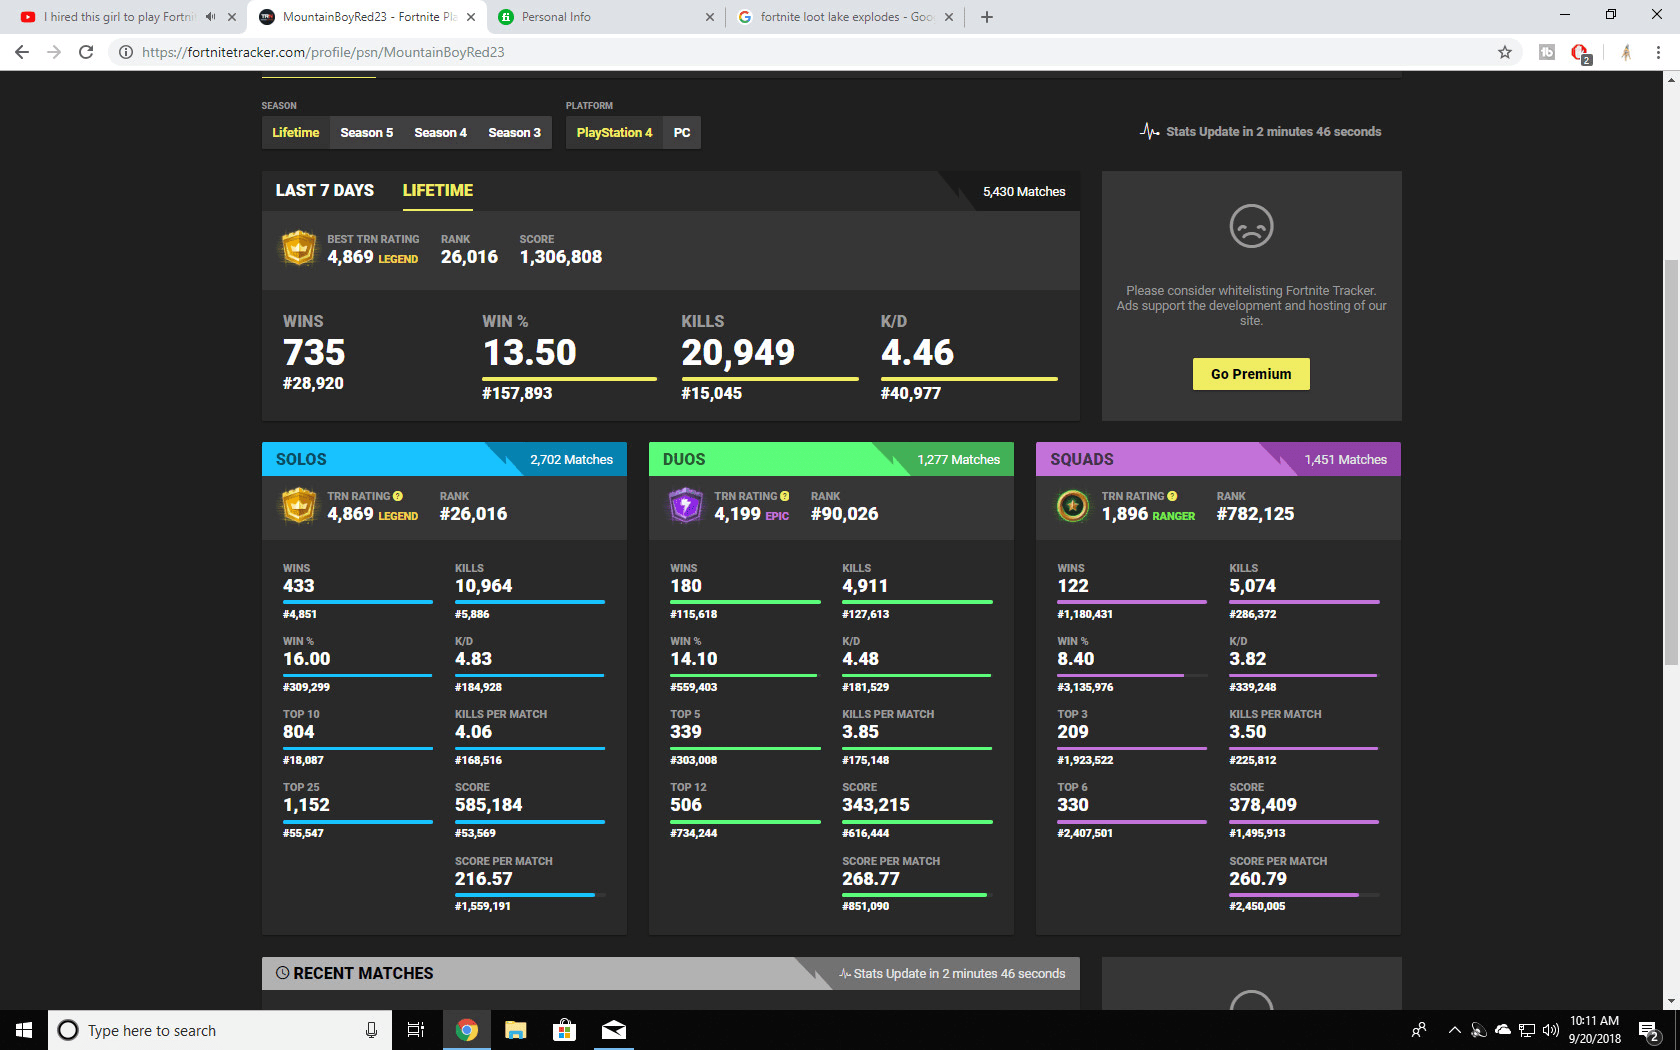 Be Your Fortnite Coach I Have Over 700 Wins 20 000 Kills By Onnyxrain - i will be your fortnite coach i have over 700 wins 20 000 kills